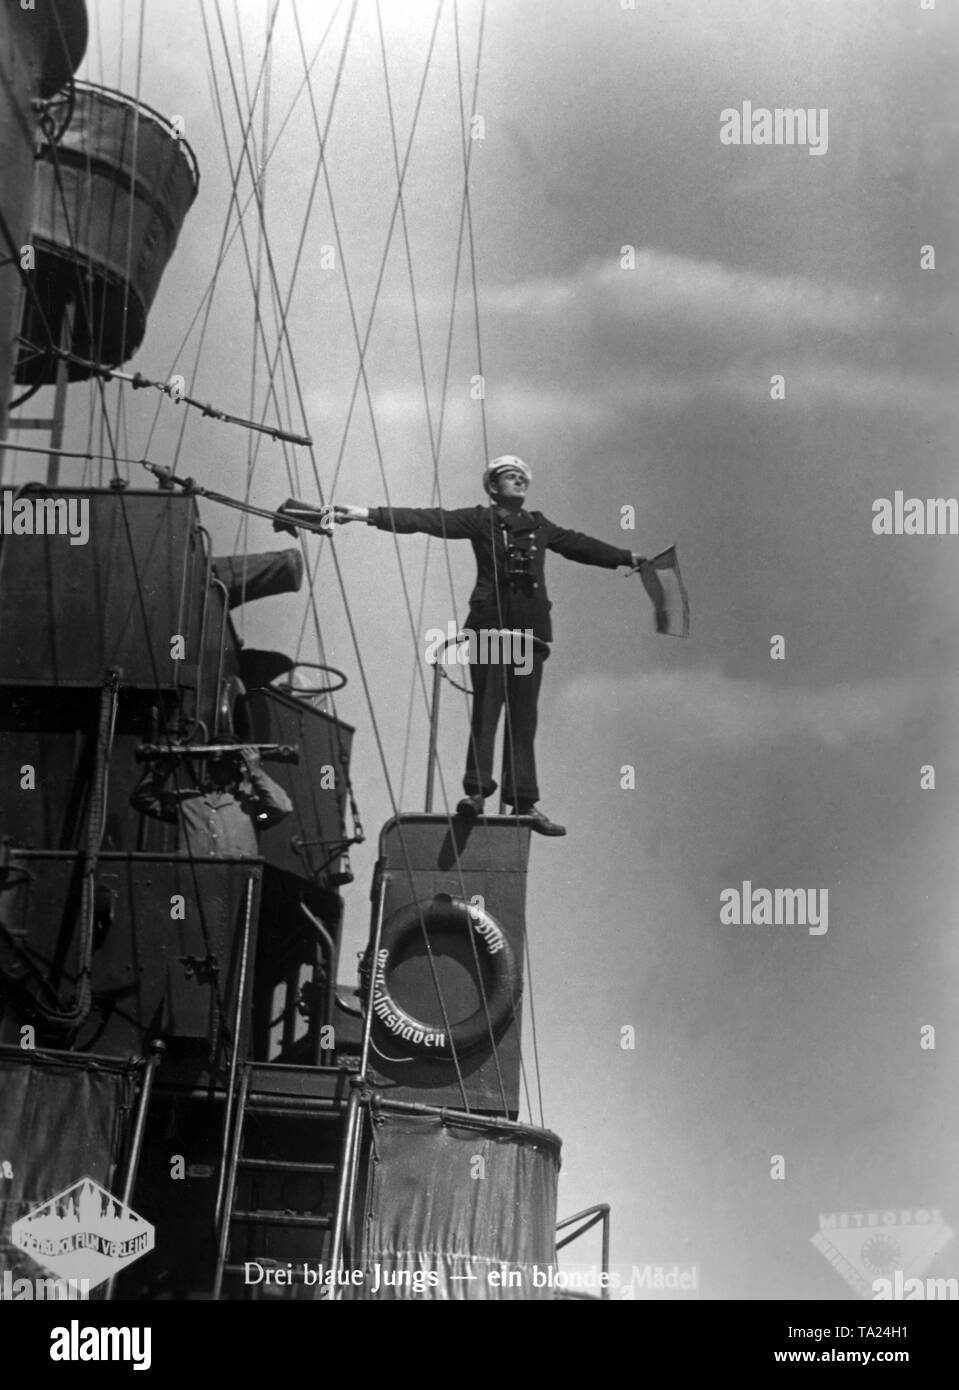 Moviestill from 'Three Bluejackets and a Blonde' from 1933, in which Heinz Ruehmann played a leading role. The picture shows the actor Friedrich Benfer as a sailor who gives flag signals on board of the Fernleitschiff 'Blitz'. Stock Photo